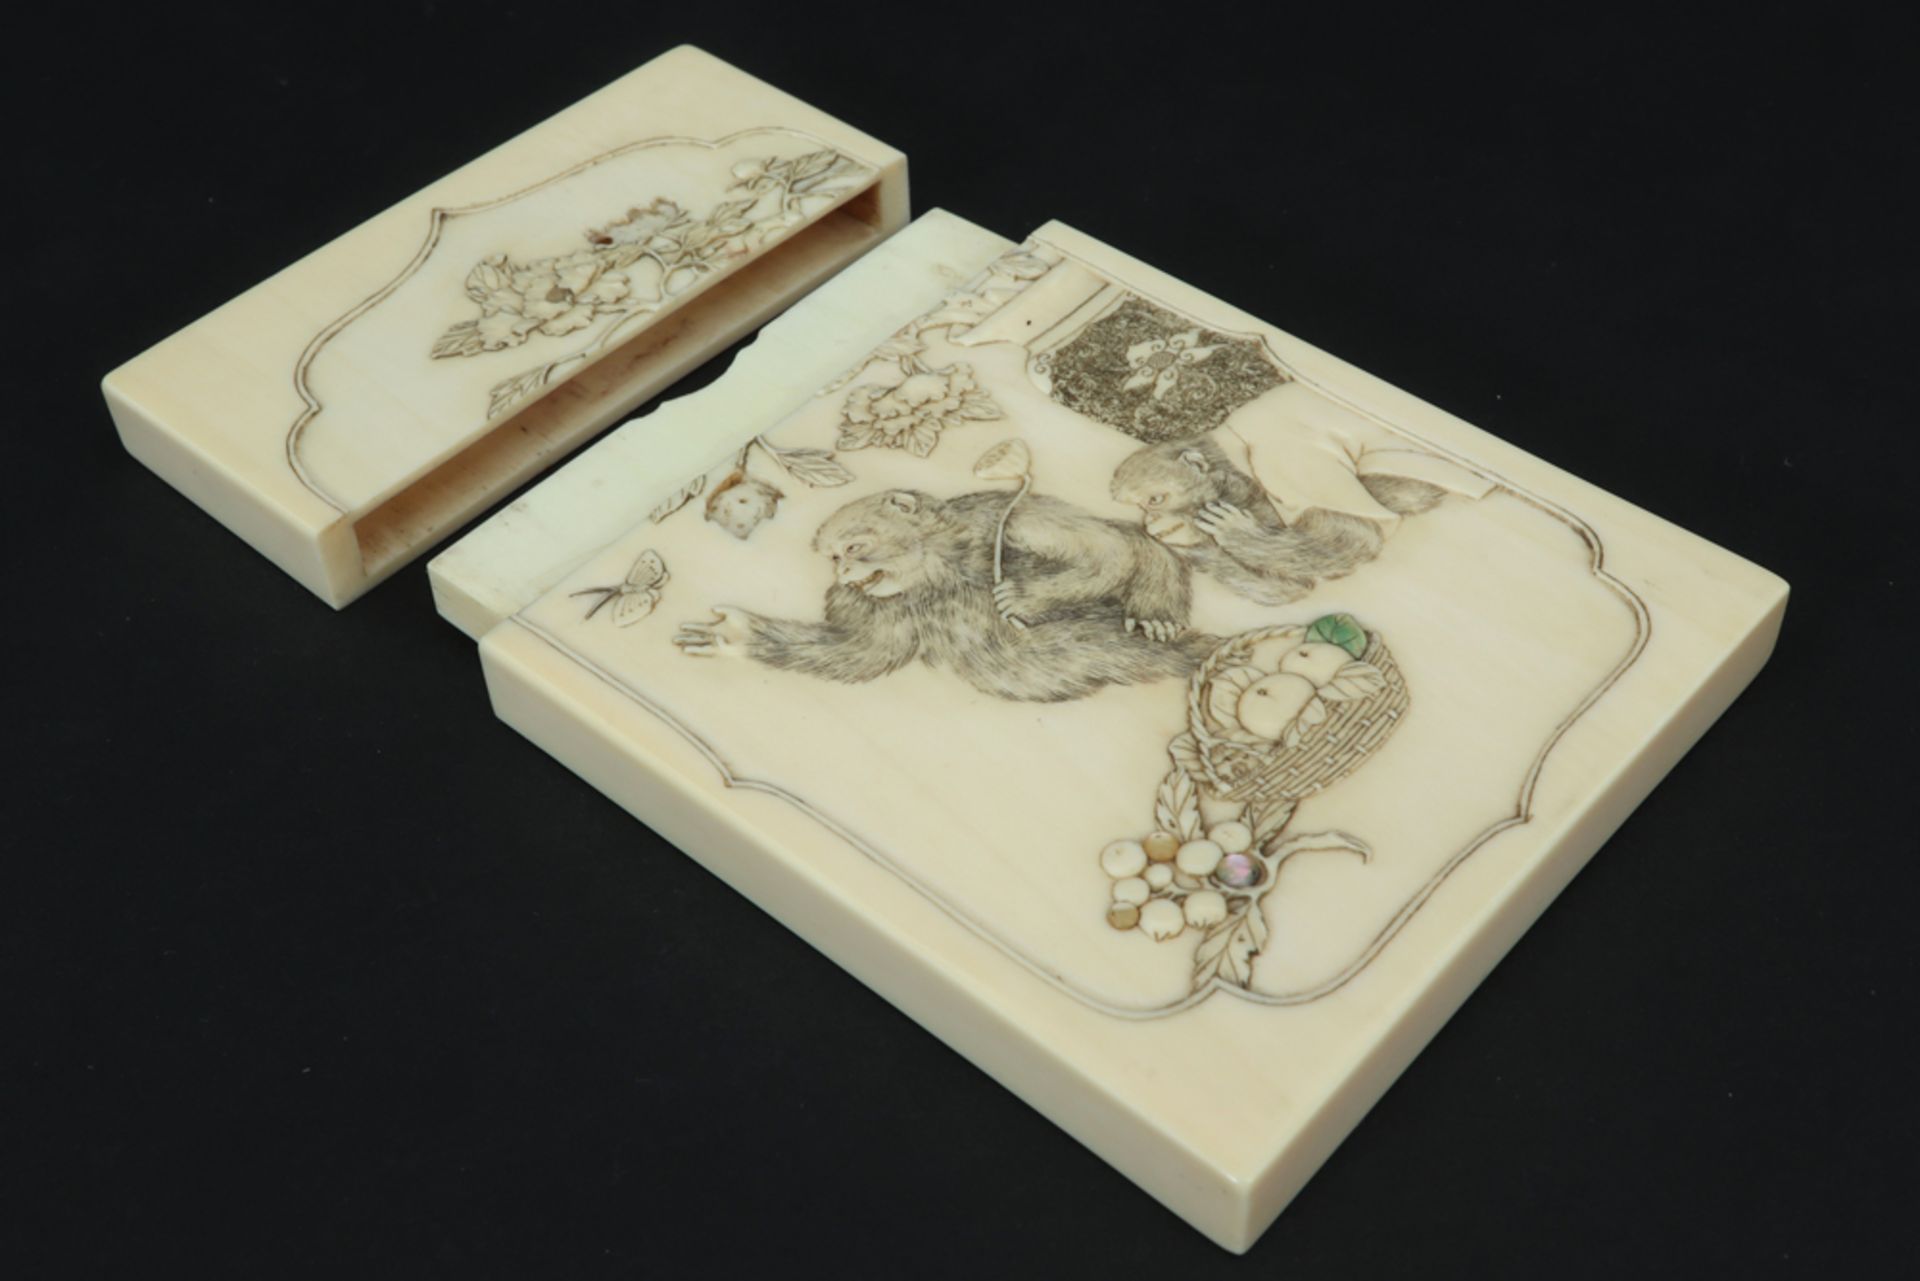 late 19th Cent. Japanese "Shibayama" cards box in ivory with inlay in gold, silver and mother of - Image 3 of 5